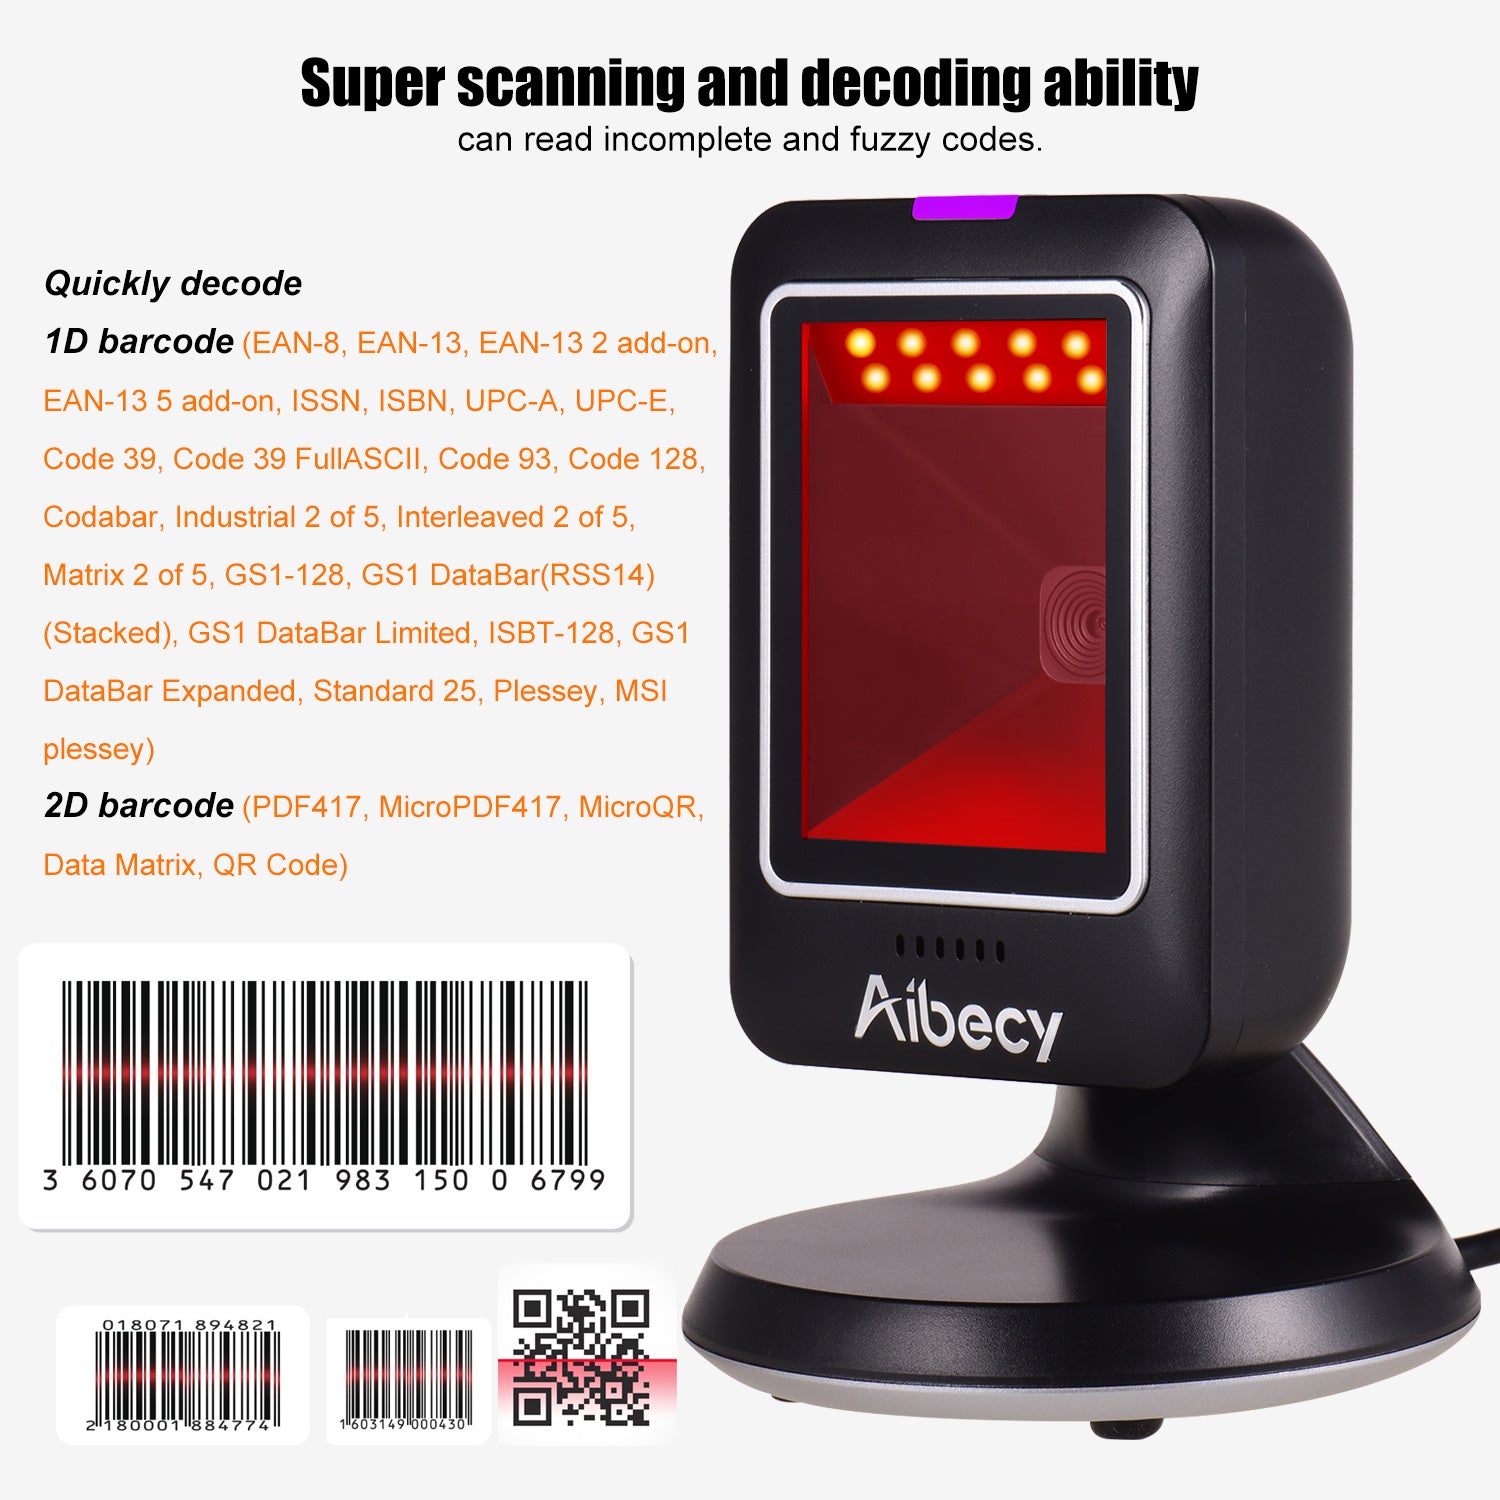 Aibecy MP6300Y 1D/2D/QR Omnidirectional Barcode Scanner USB Wired Bar Code Reader CMOS Hand-Free QR Code Scanner for  Retail